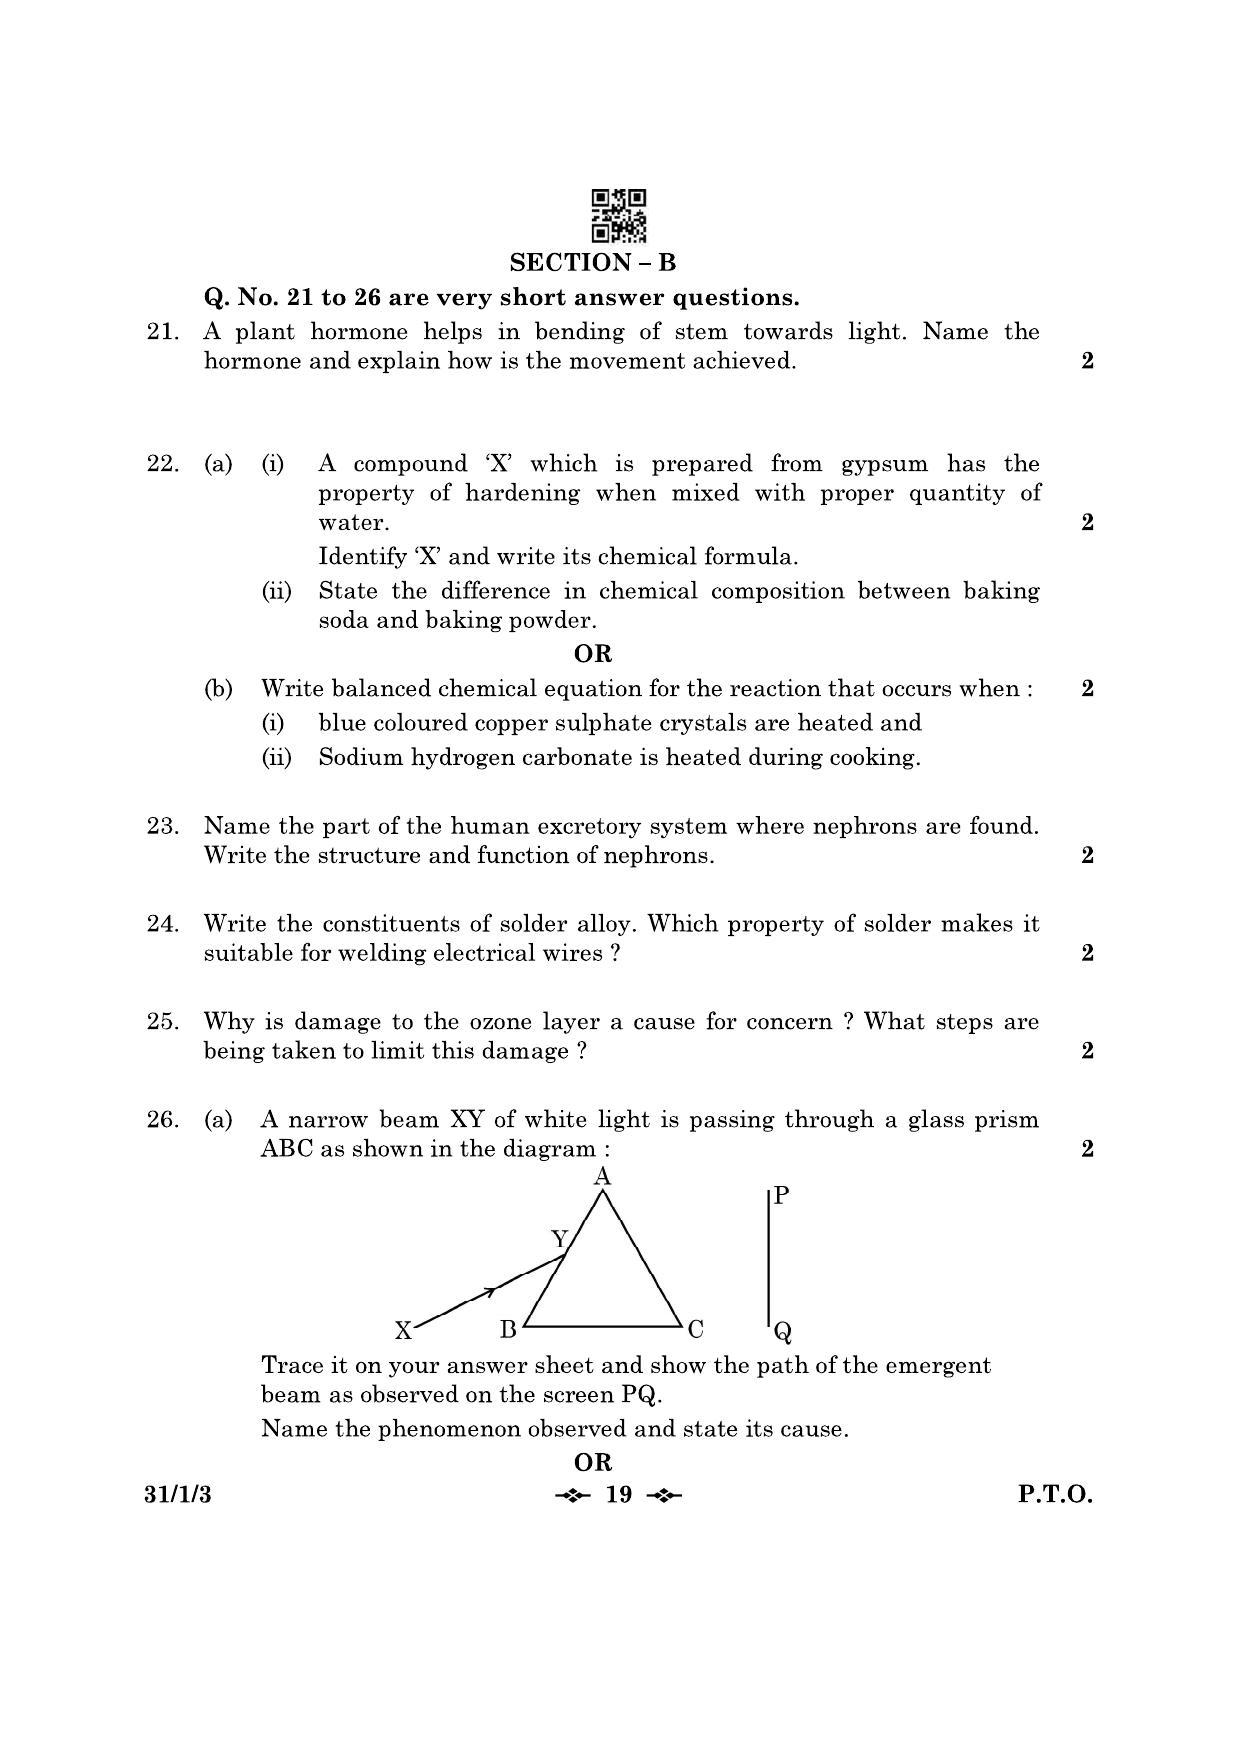 CBSE Class 10 31-1-3 Science 2023 Question Paper - Page 19